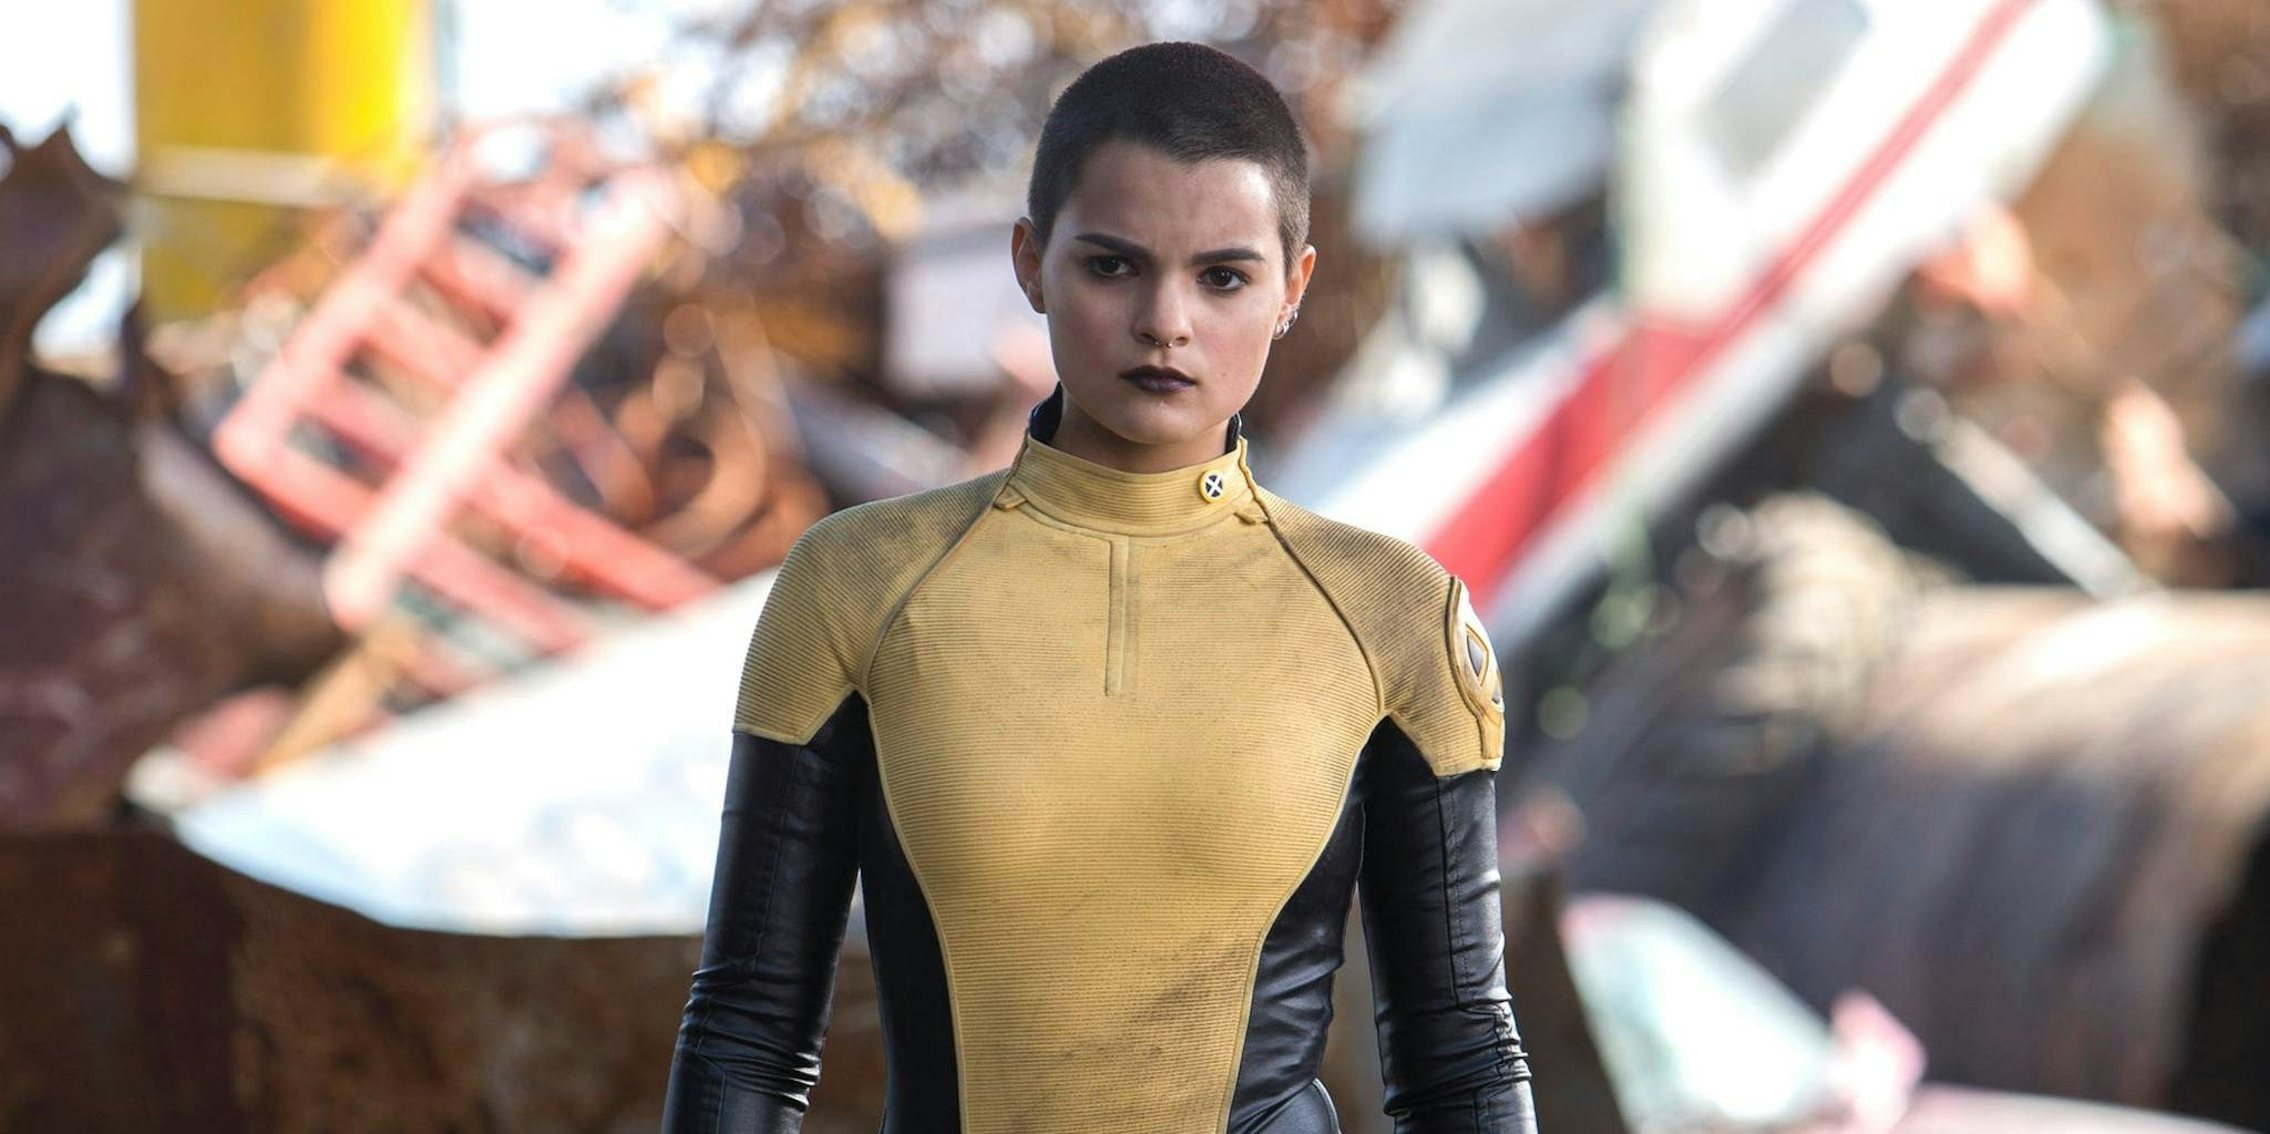 A quick guide to Negasonic Teenage Warhead, the real star 'Deadpool' - The Daily